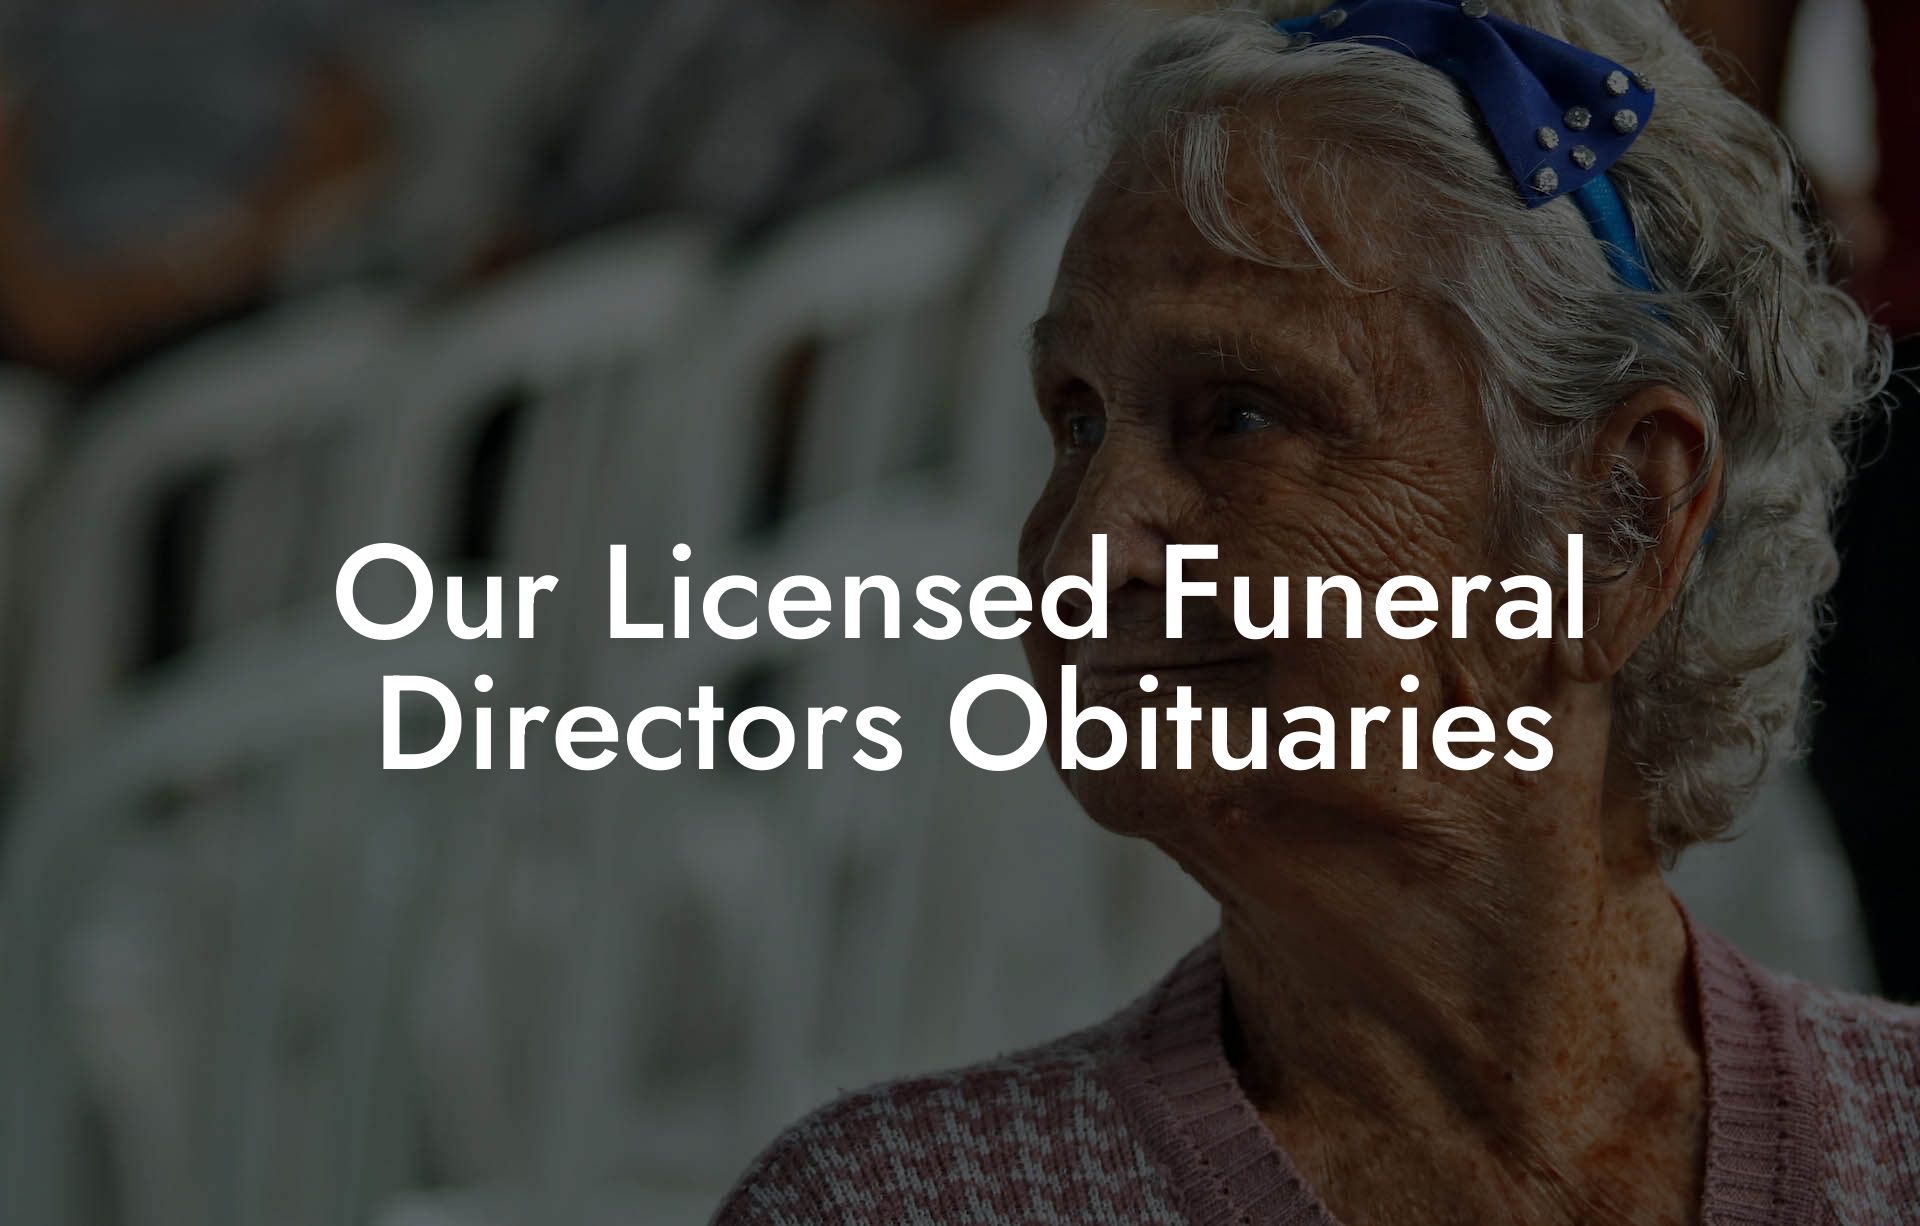 Our Licensed Funeral Directors Obituaries